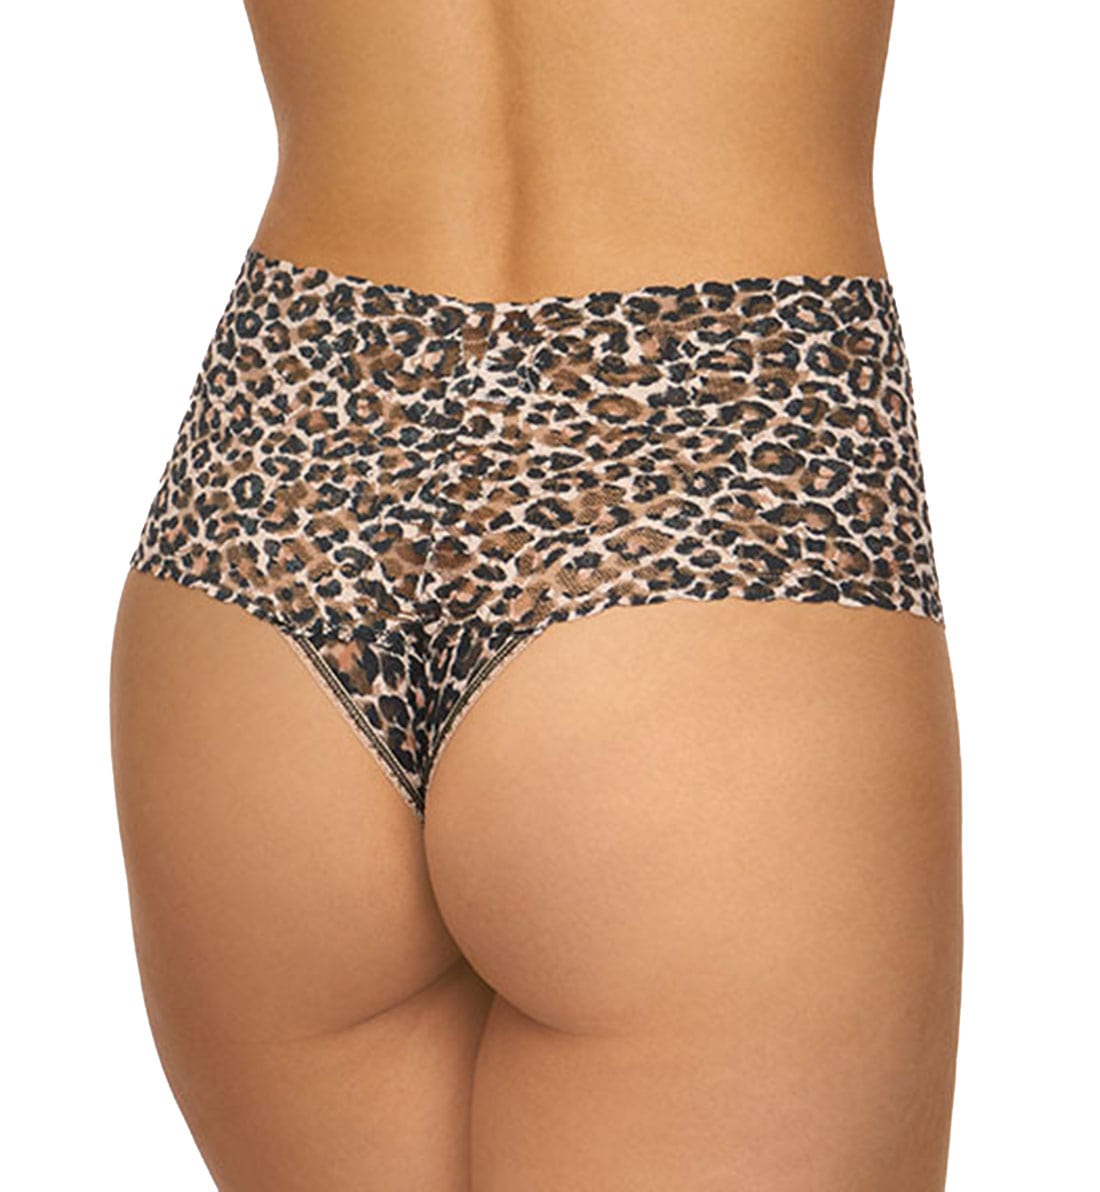 Hanky Panky Printed Retro Lace Thong (PR9K1926),Classic Leopard - Brown/Black,One Size